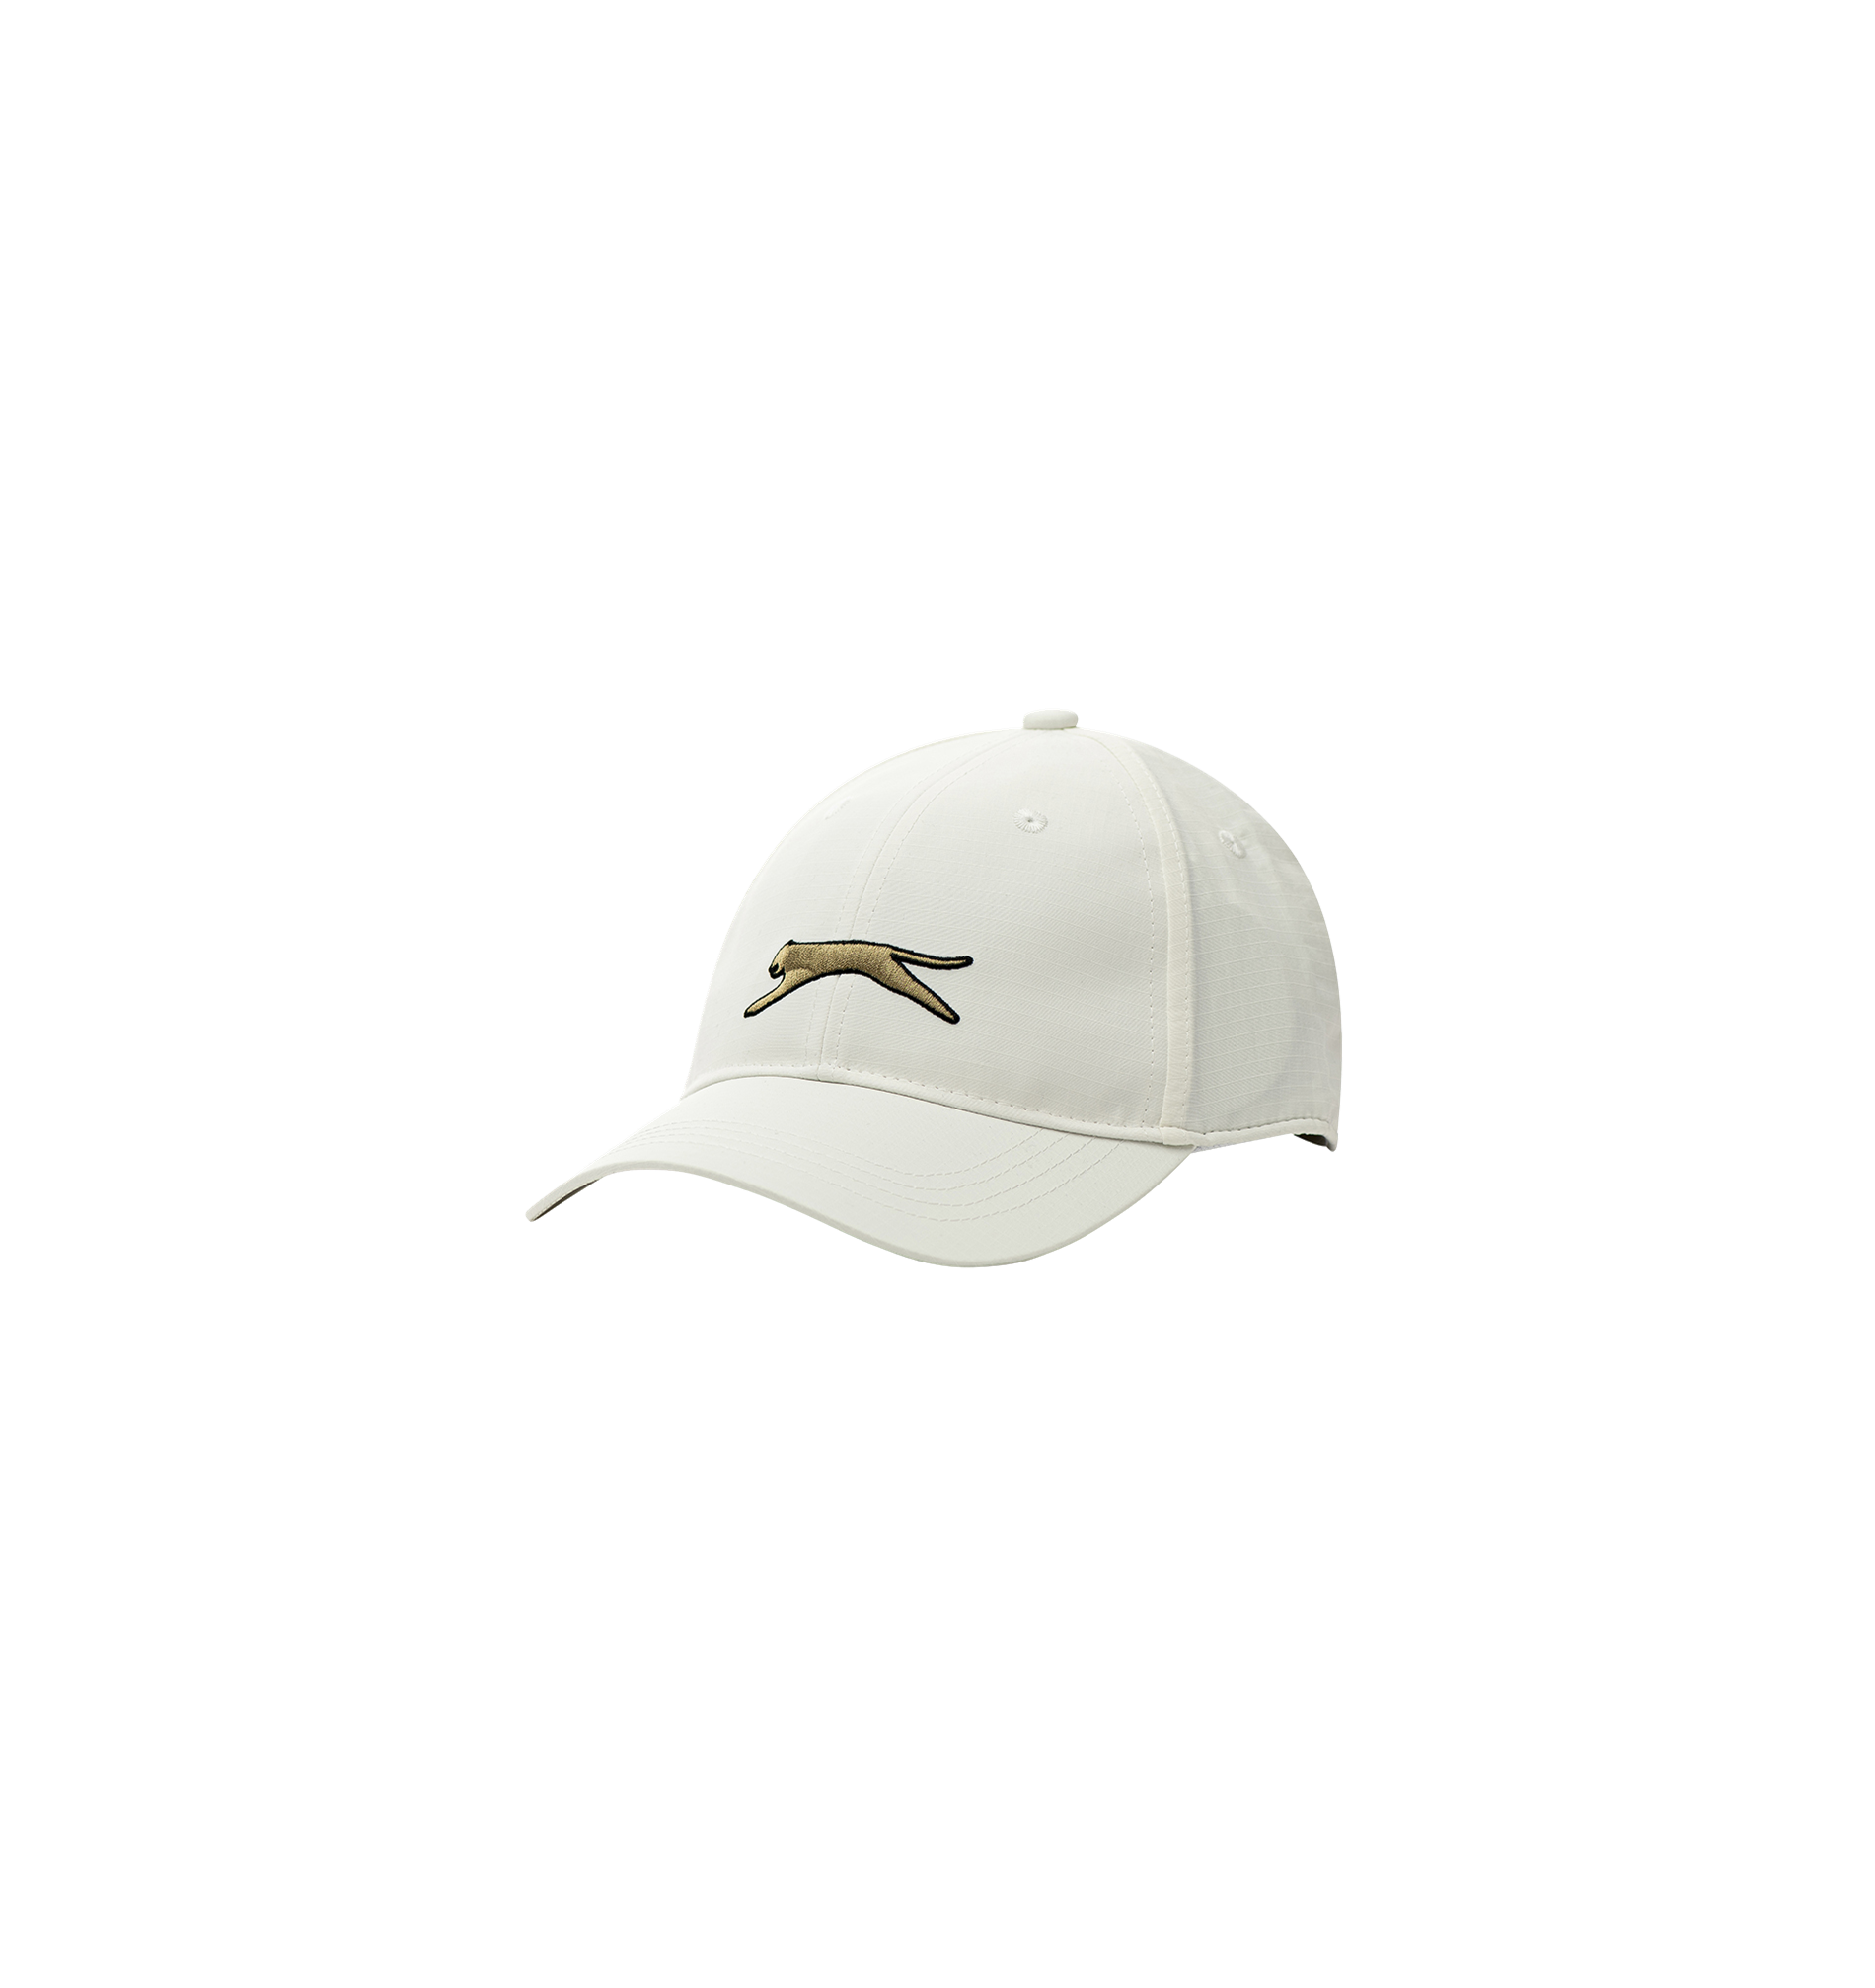 PANTHER CAP II EMERSON WHITE